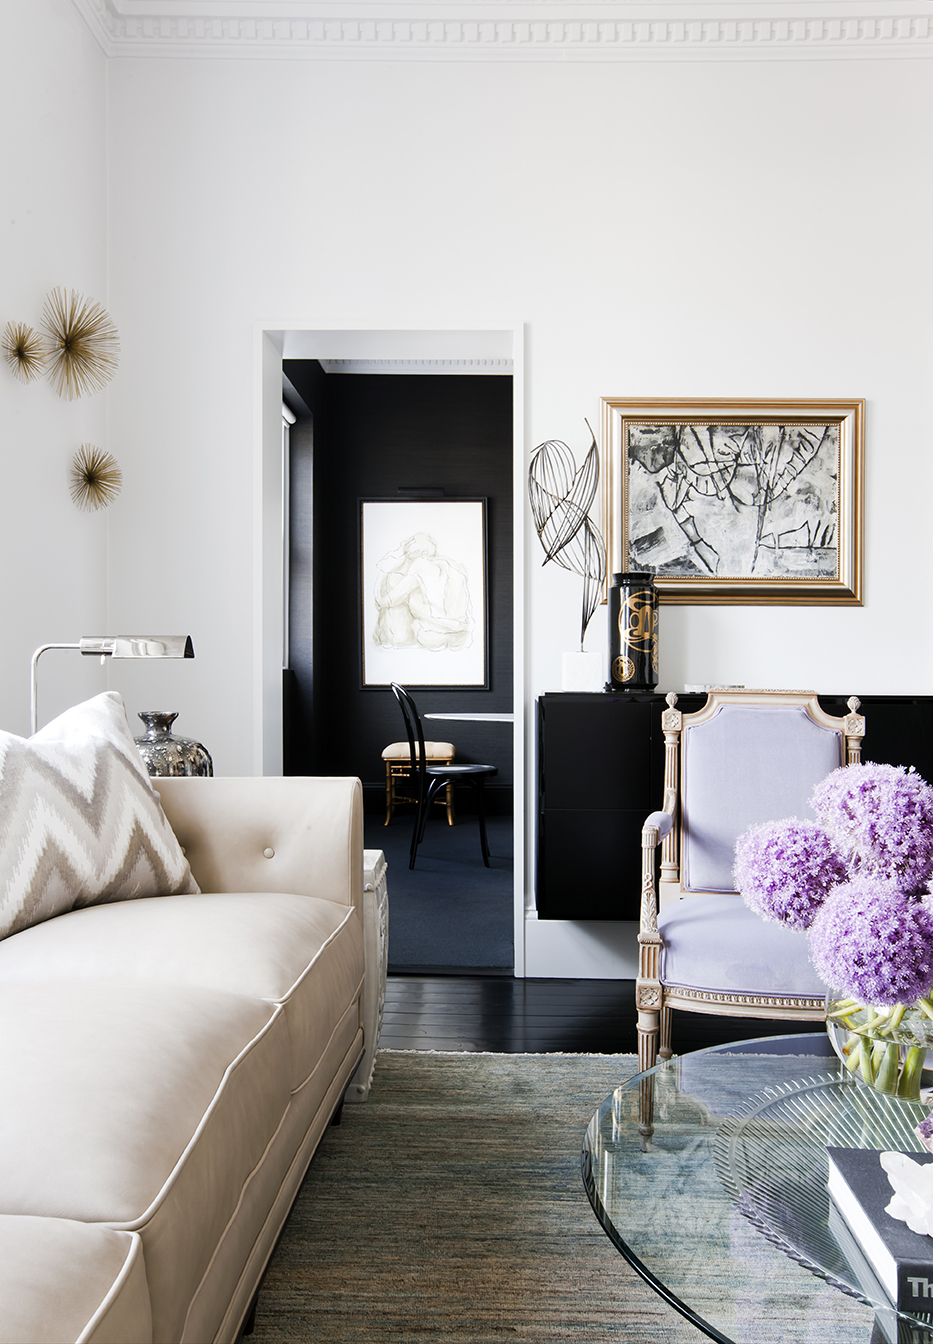 Art Deco heritage apartment living room with antique lilac purple armchair, Curtis Jere sculpture and black Japan floor